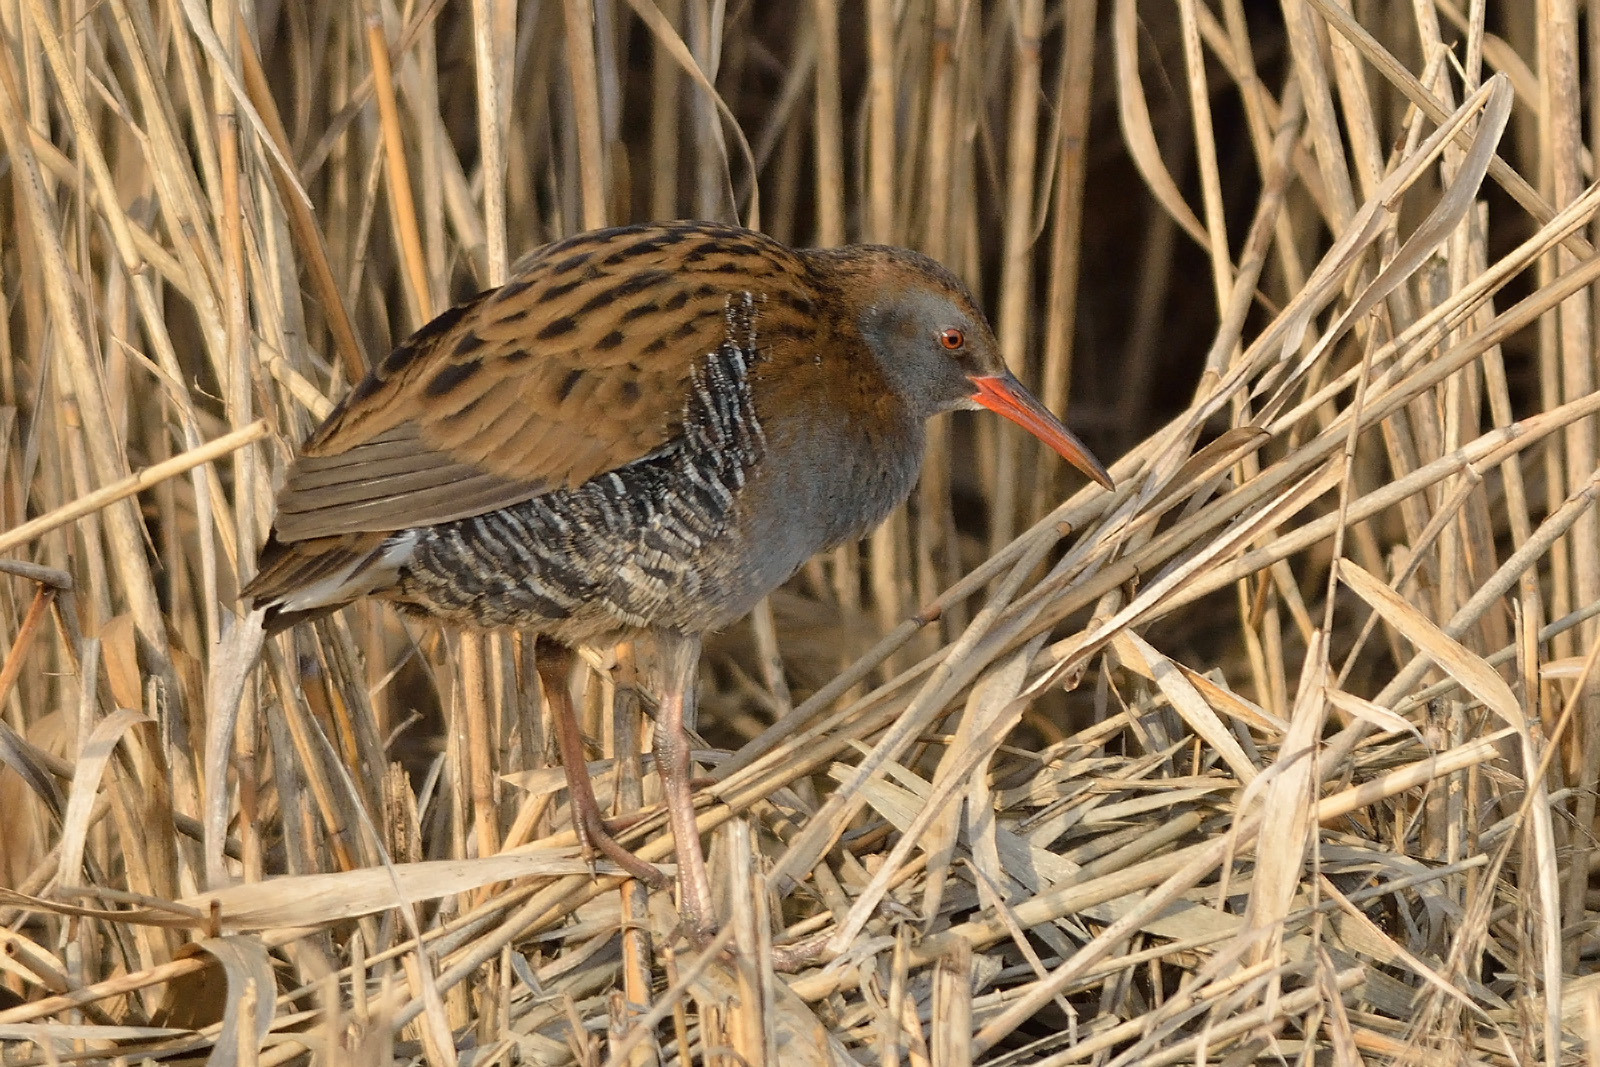 Cleaning of water rail...